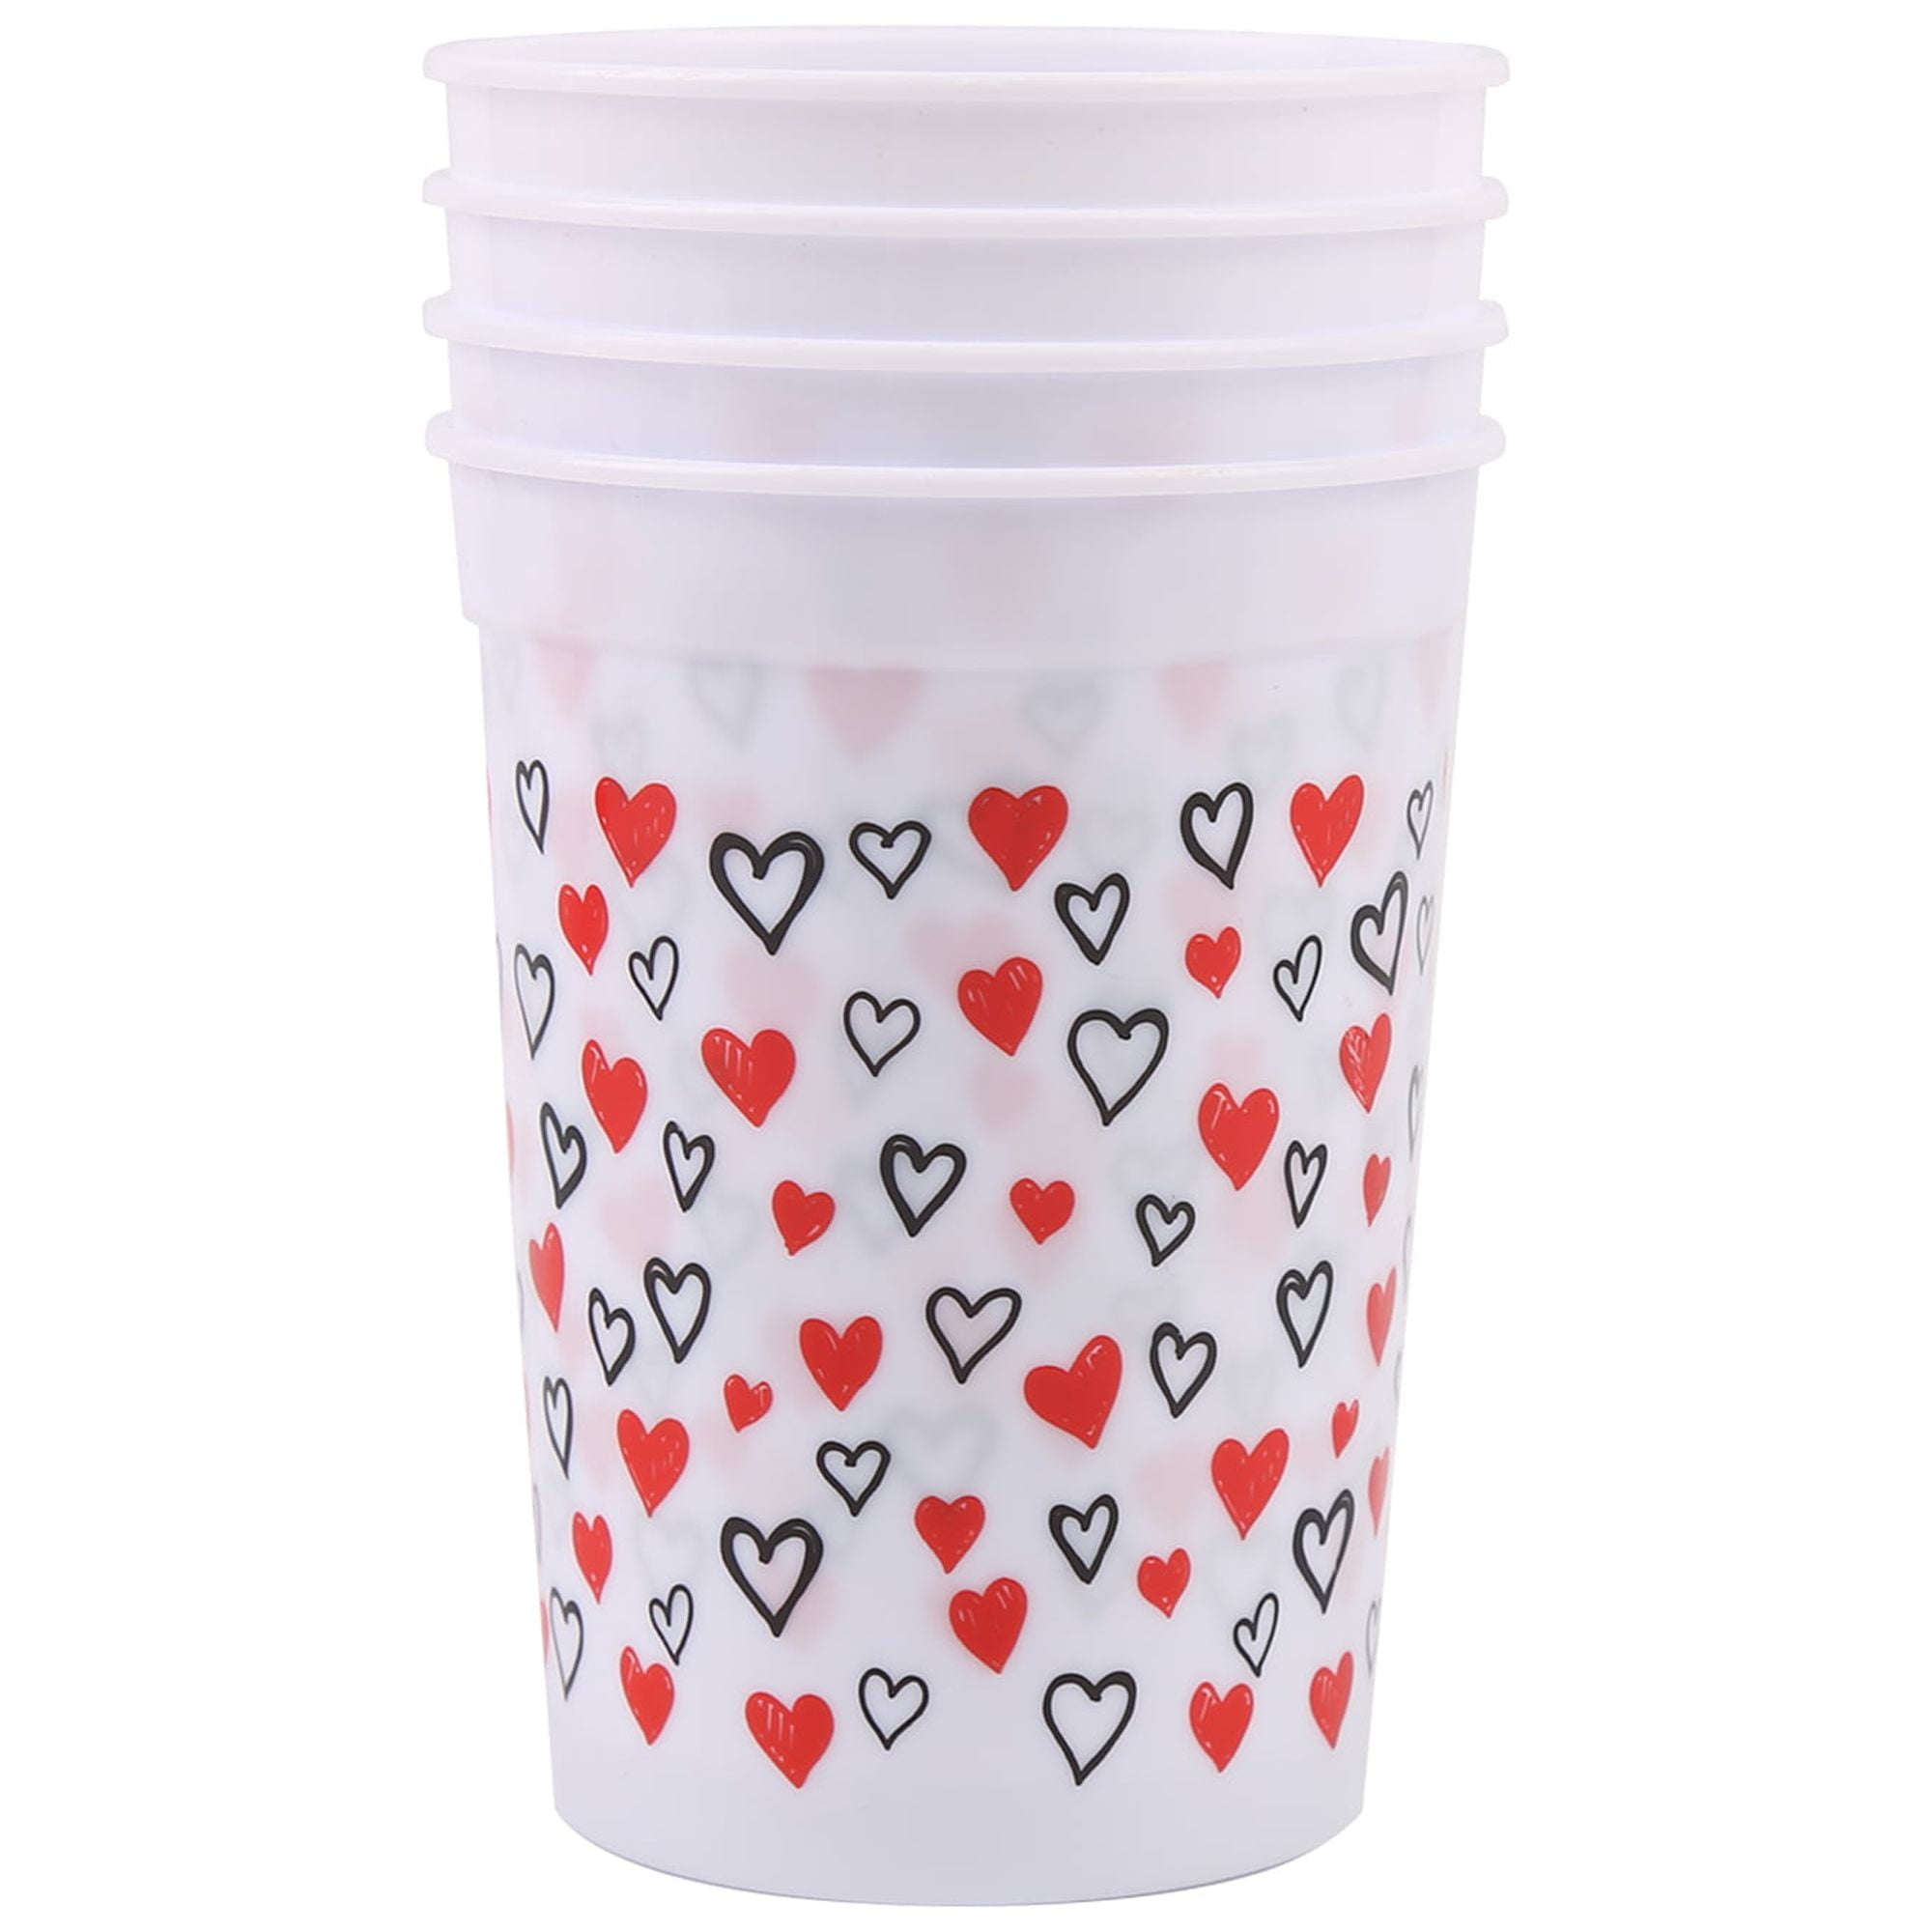 Valentine's Day White & Red Hearts Plastic Cups, 4 Count, by Way to  Celebrate 